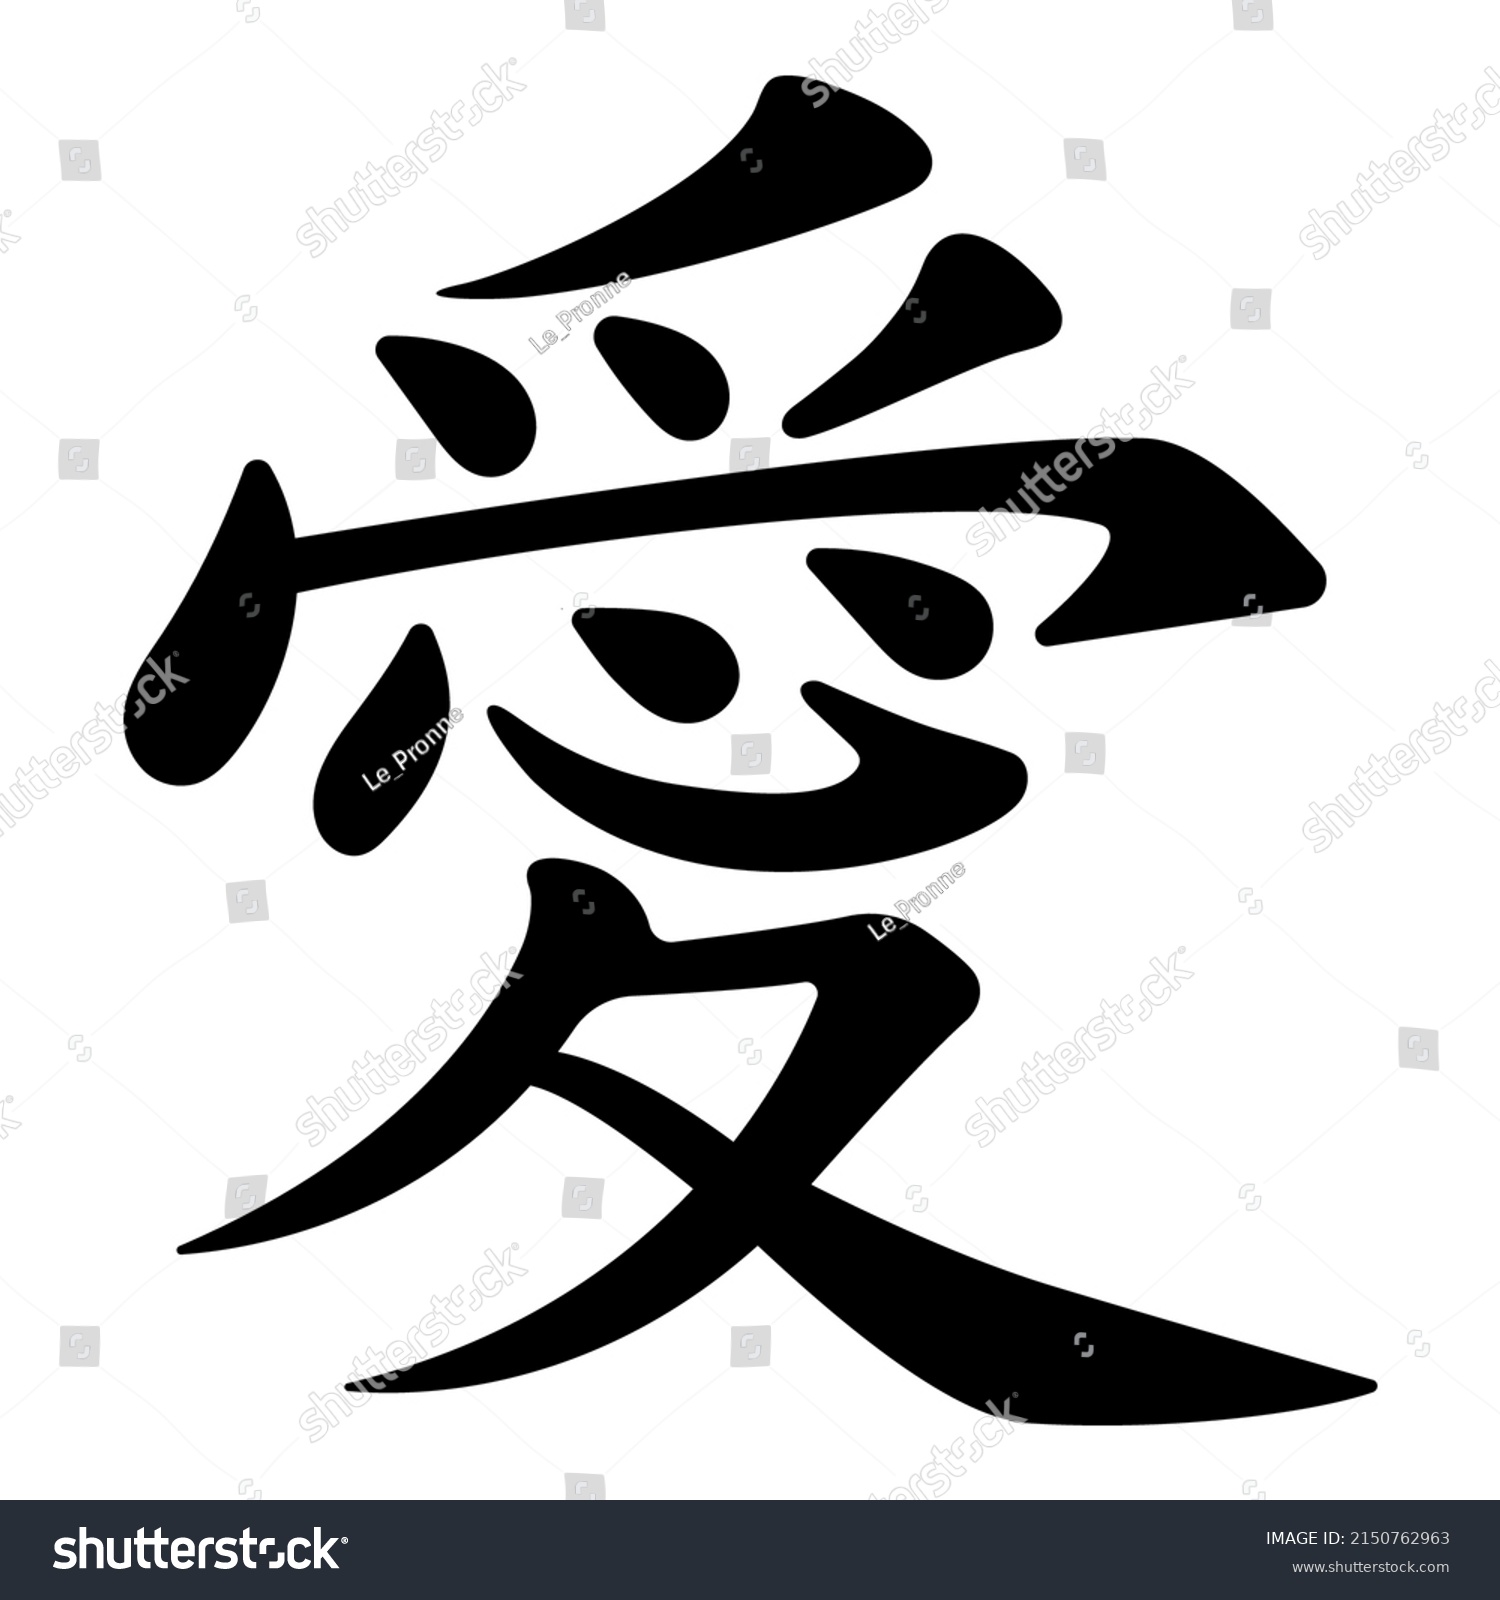 SVG of Love, Chinese symbol and silhouette isolated. Template for plotter lazer cutting. svg